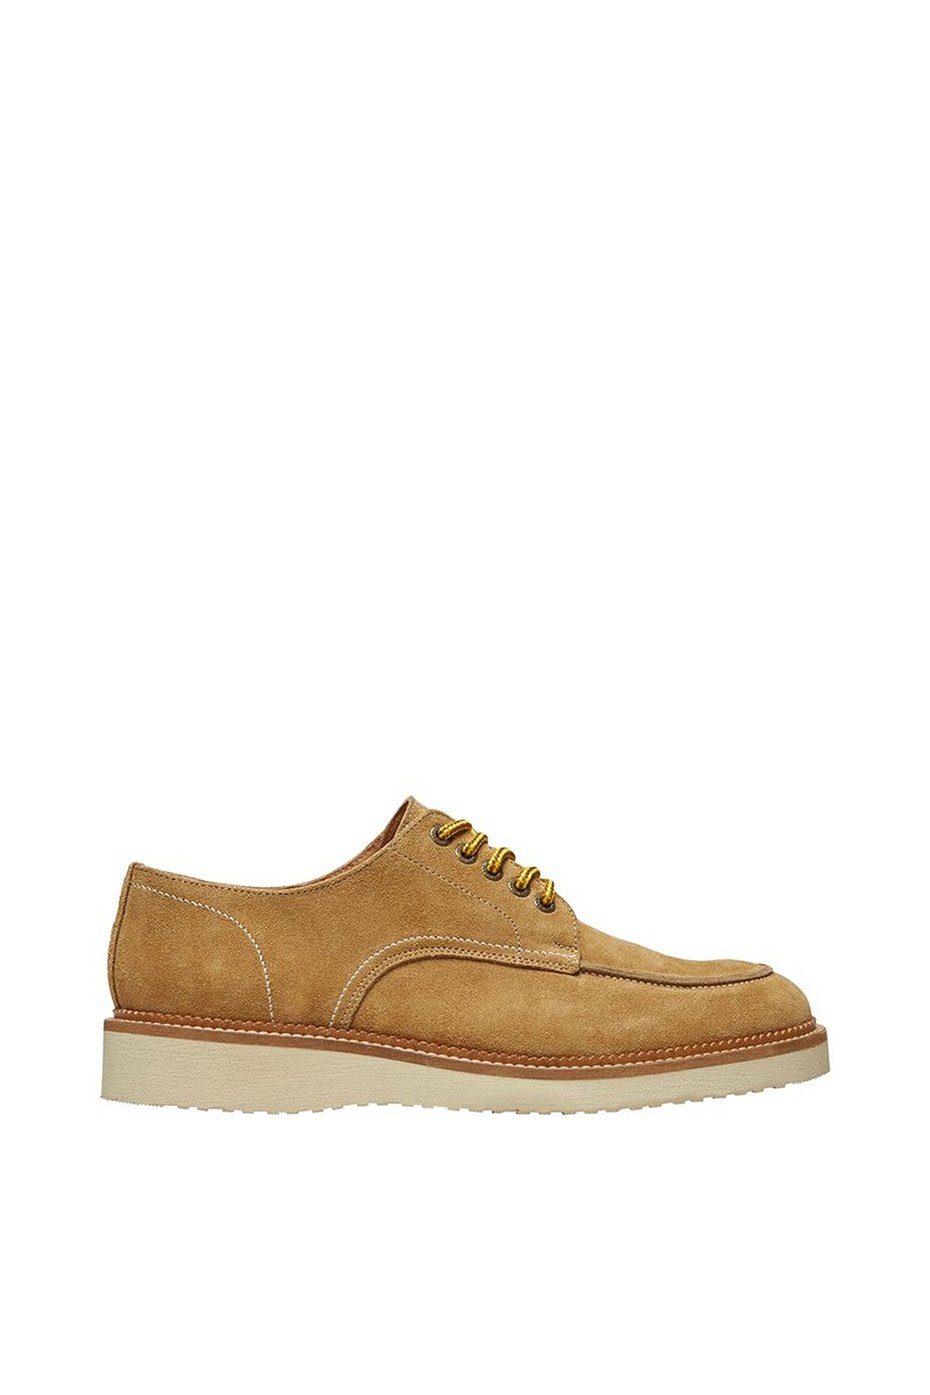 Selected Homme SELECTED HOMME BROWN SUEDE TEO MOC SHOE